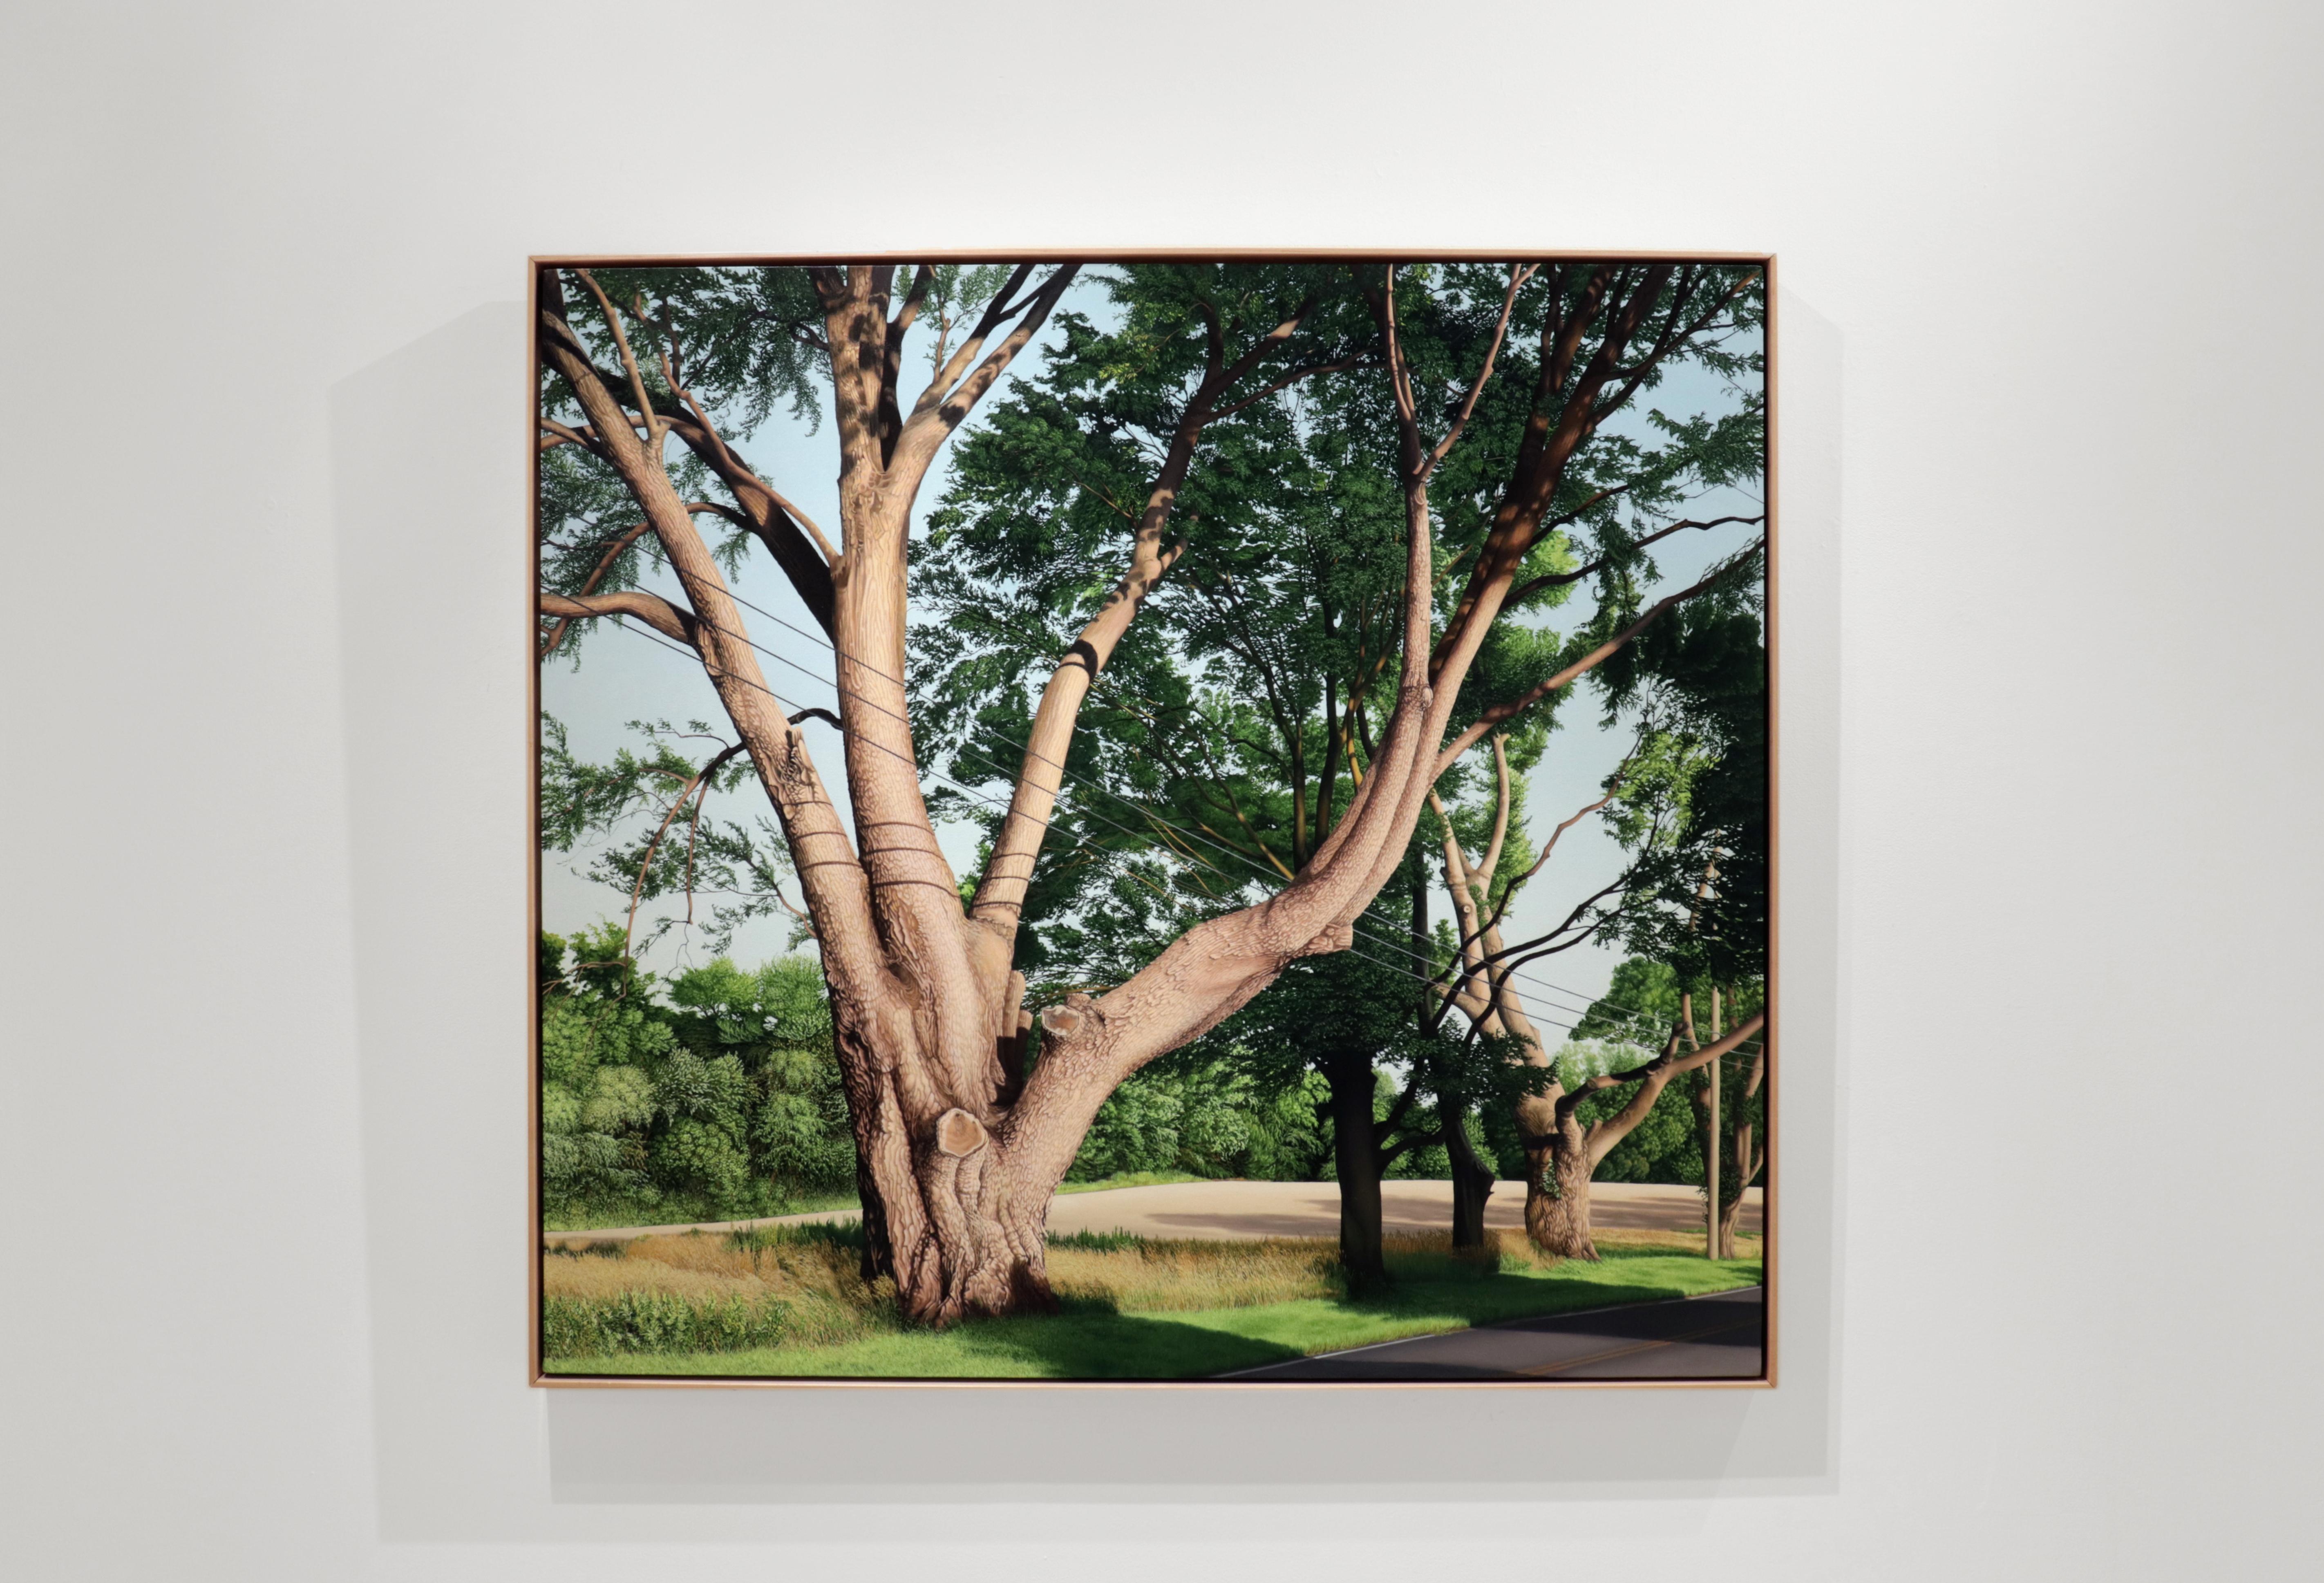 TRIMMED TREES - Contemporary Landscape / Realism / Nature Scene - Painting by Anita Mazzucca